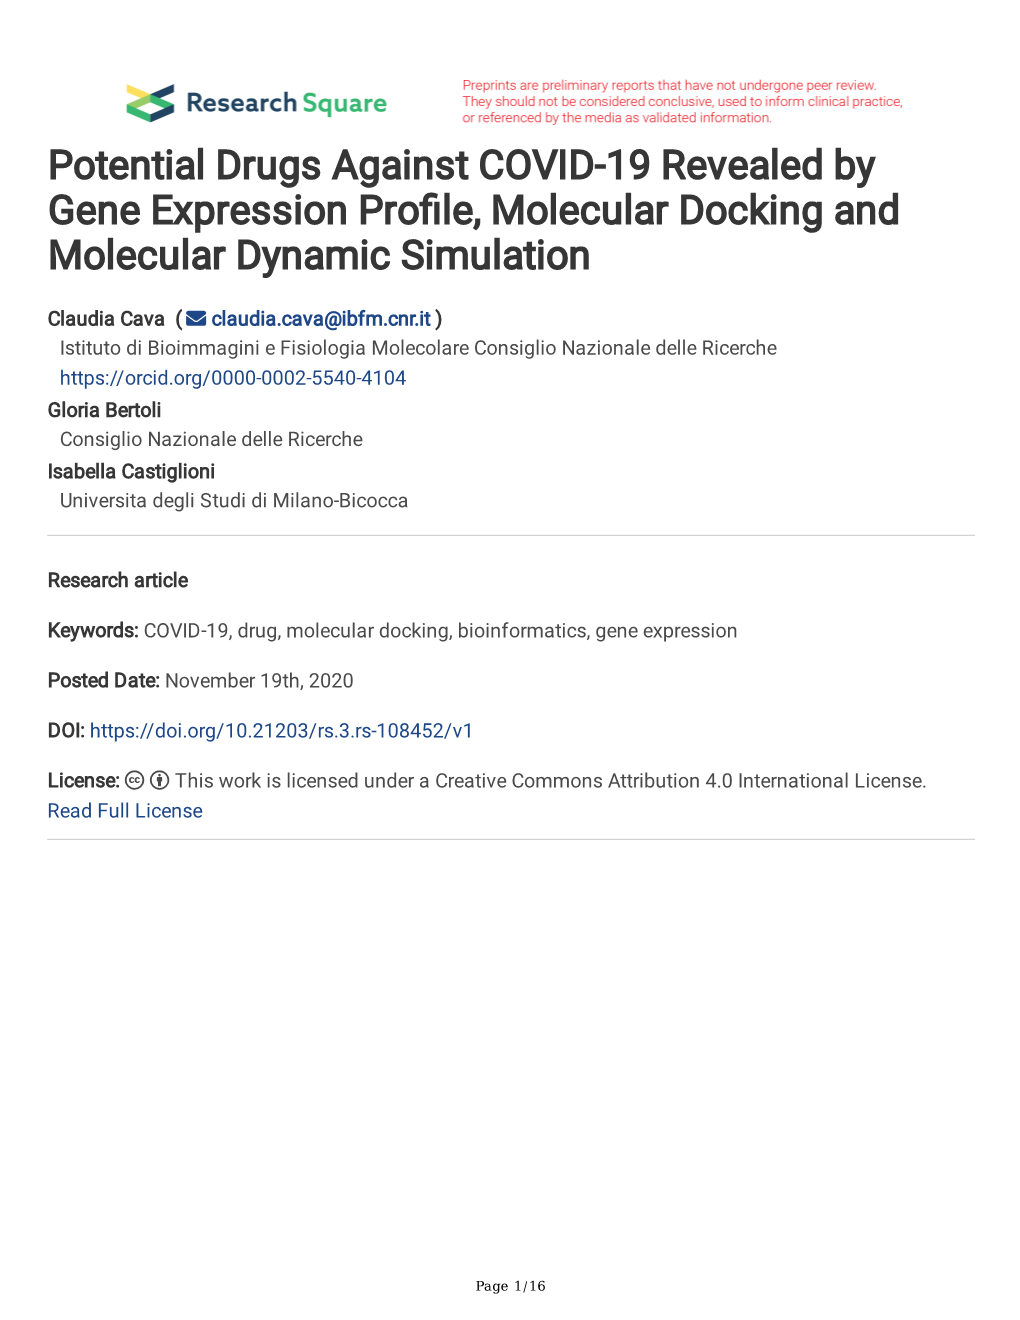 Potential Drugs Against COVID-19 Revealed by Gene Expression Profle, Molecular Docking and Molecular Dynamic Simulation